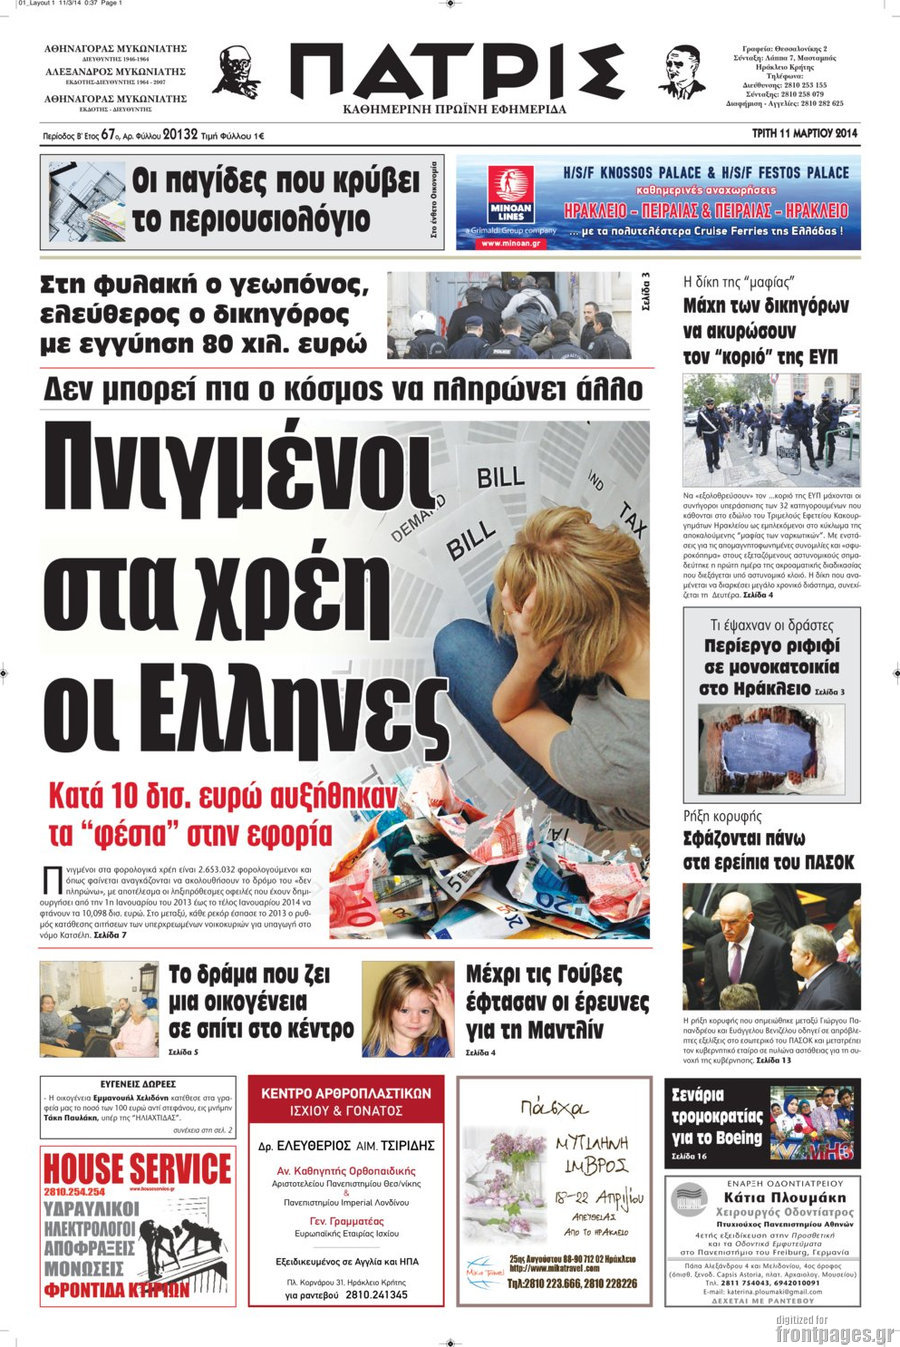 Search for Madeleine arrives in Gouves, Patris (paper edition)